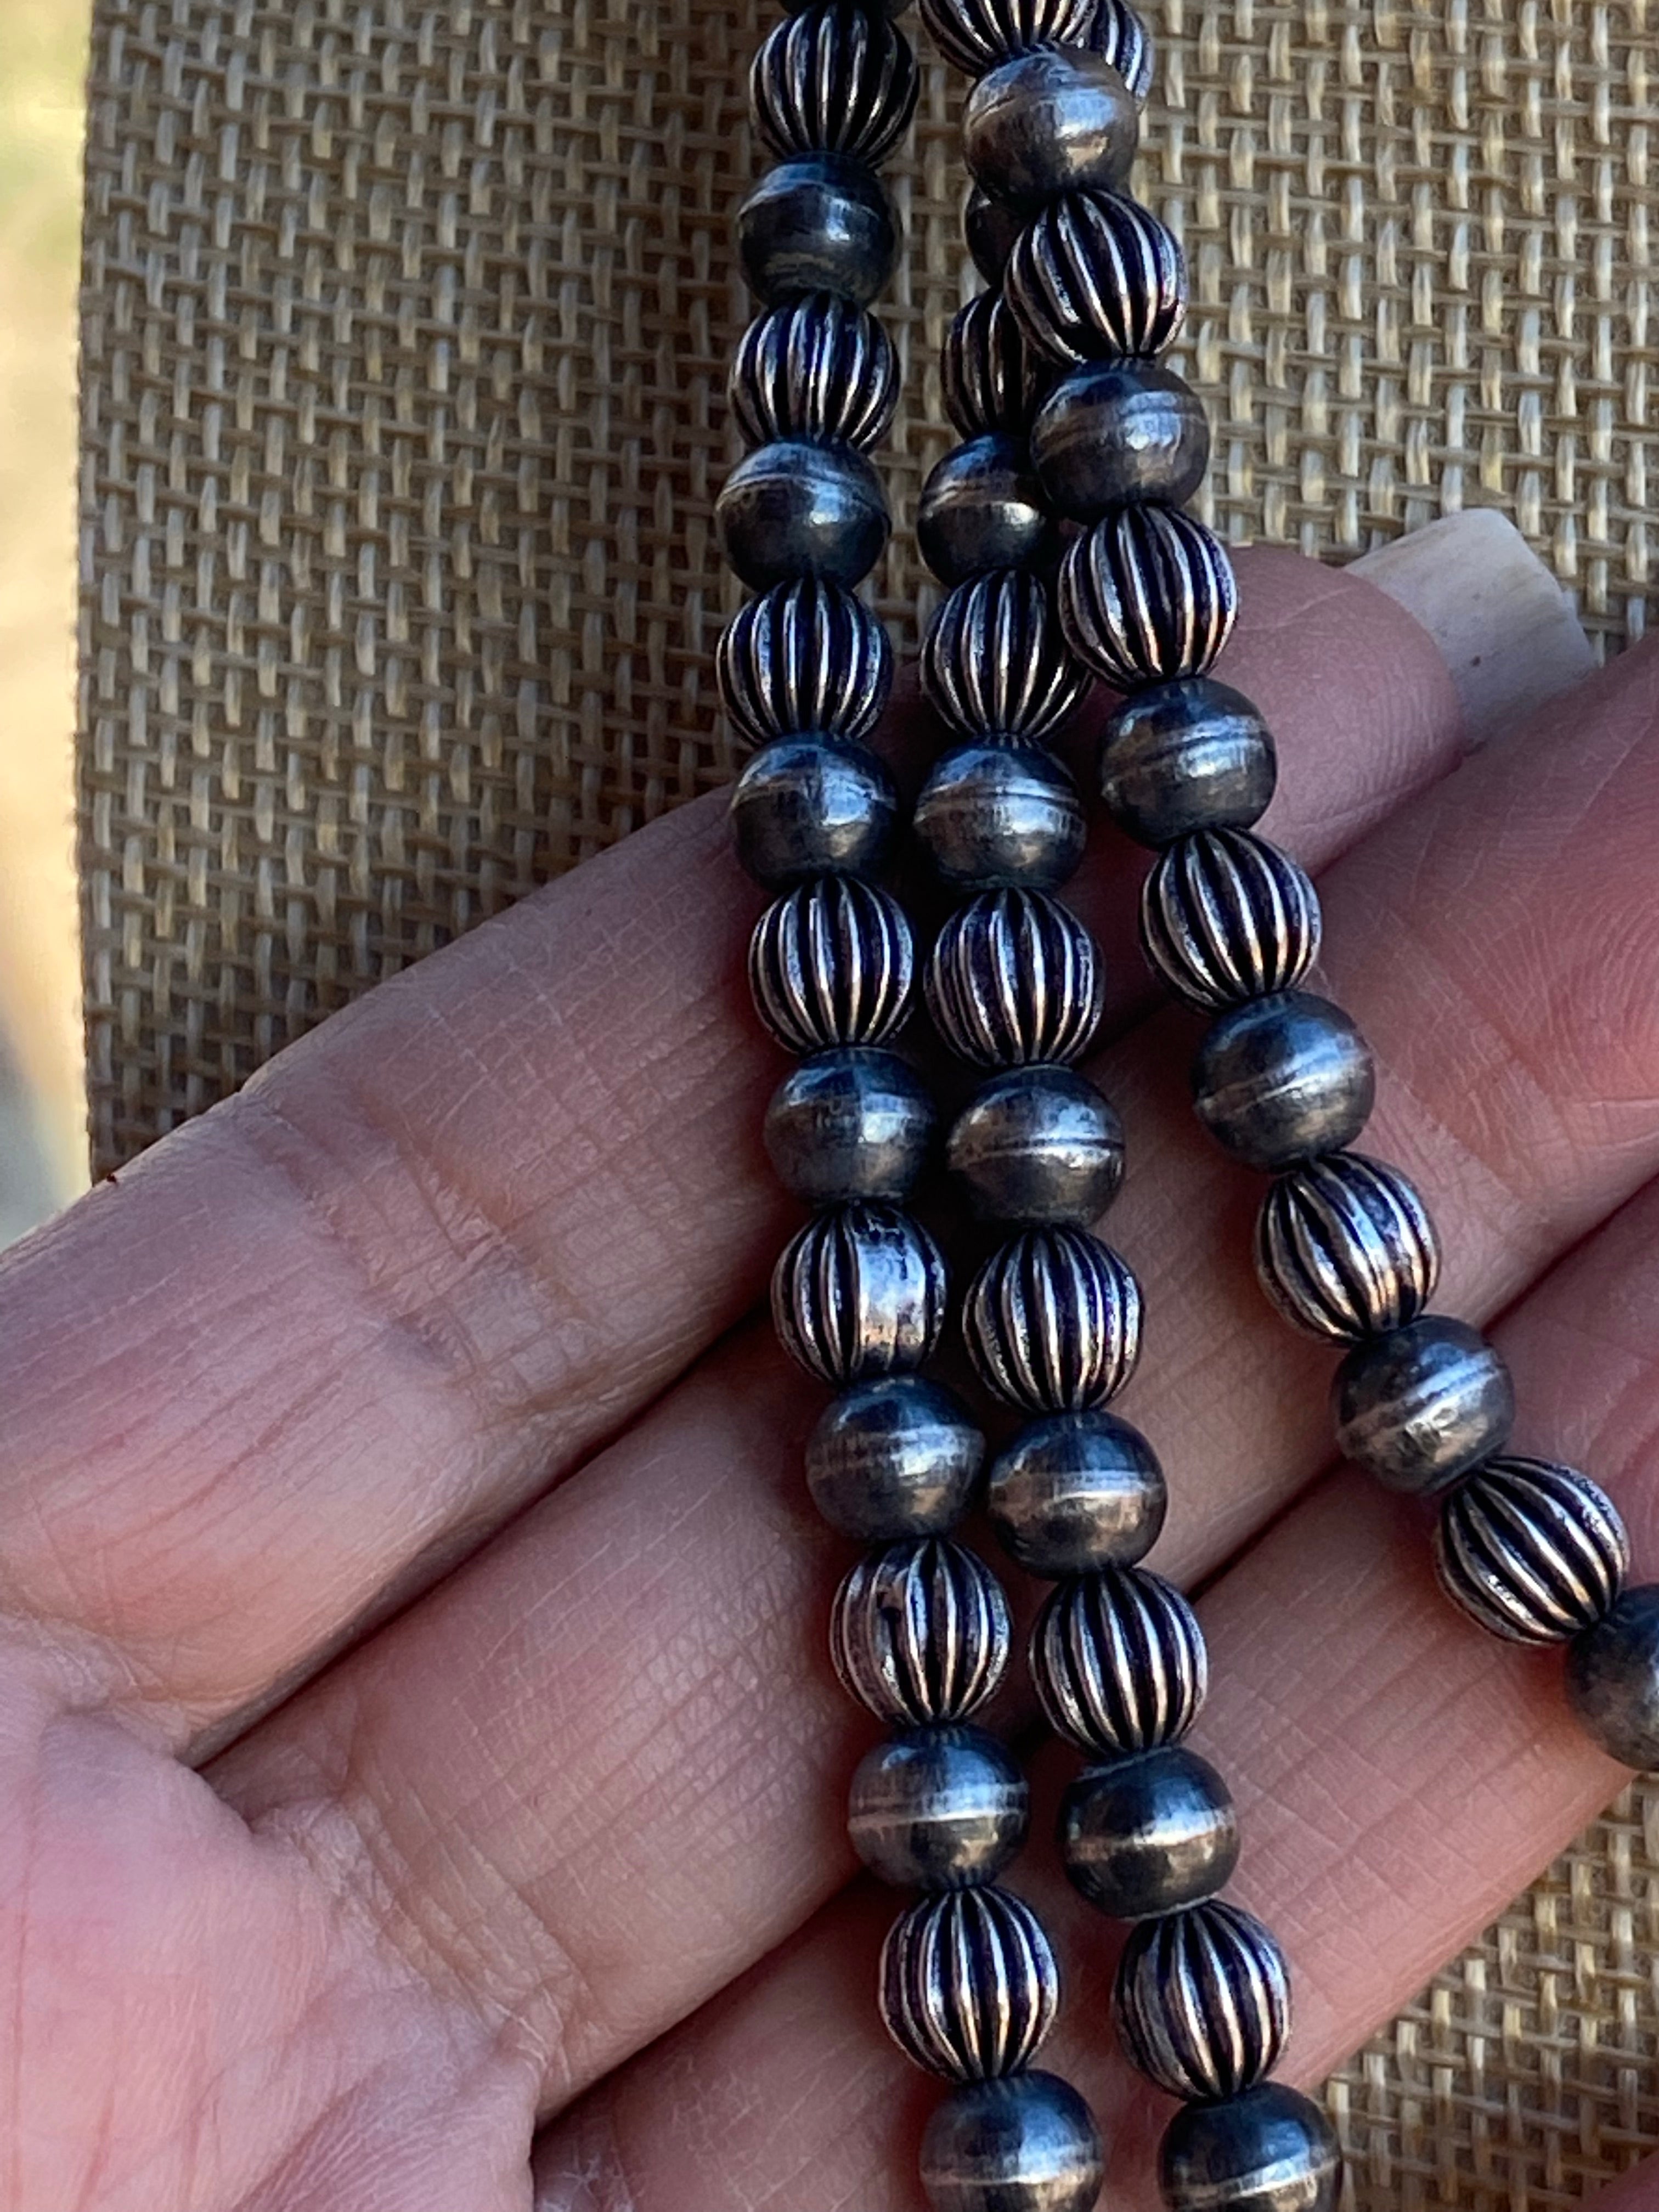 Handmade Navajo Pearl Necklace ~ All 6mm beads ~ Choose Length